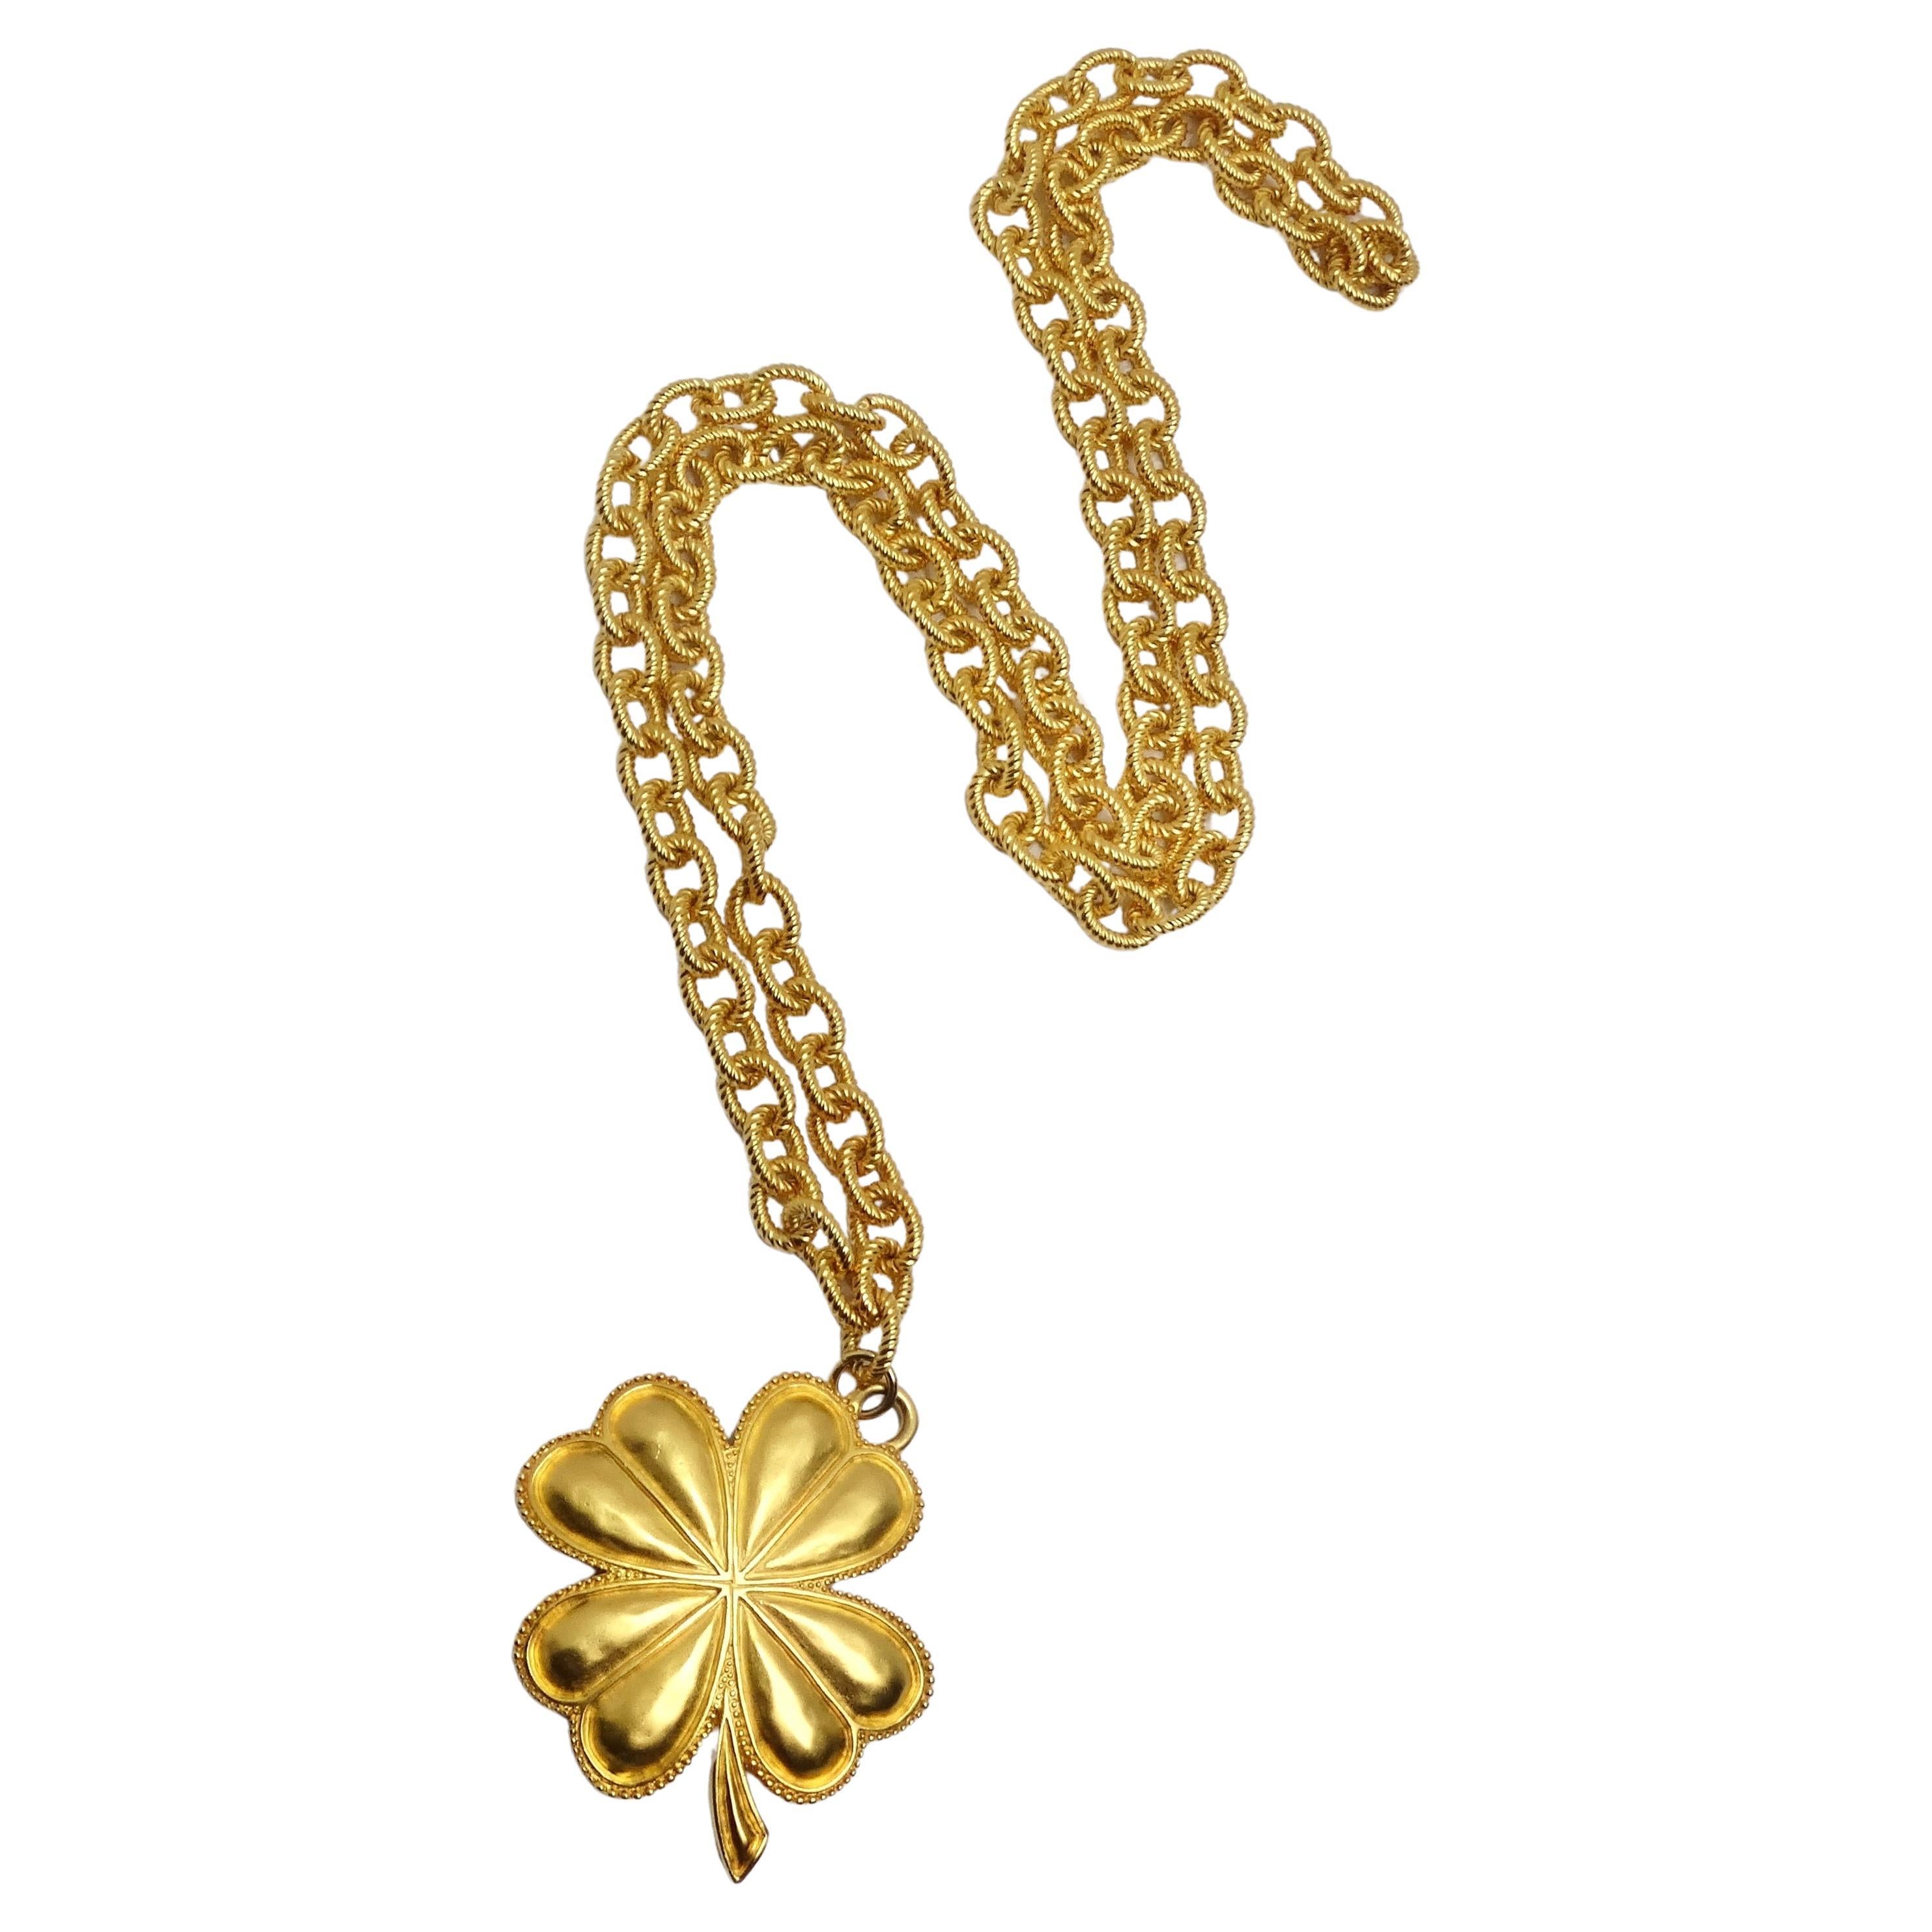 Karl Lagerfeld 1980s Gold Plated Shamrock Pendent Necklace For Sale